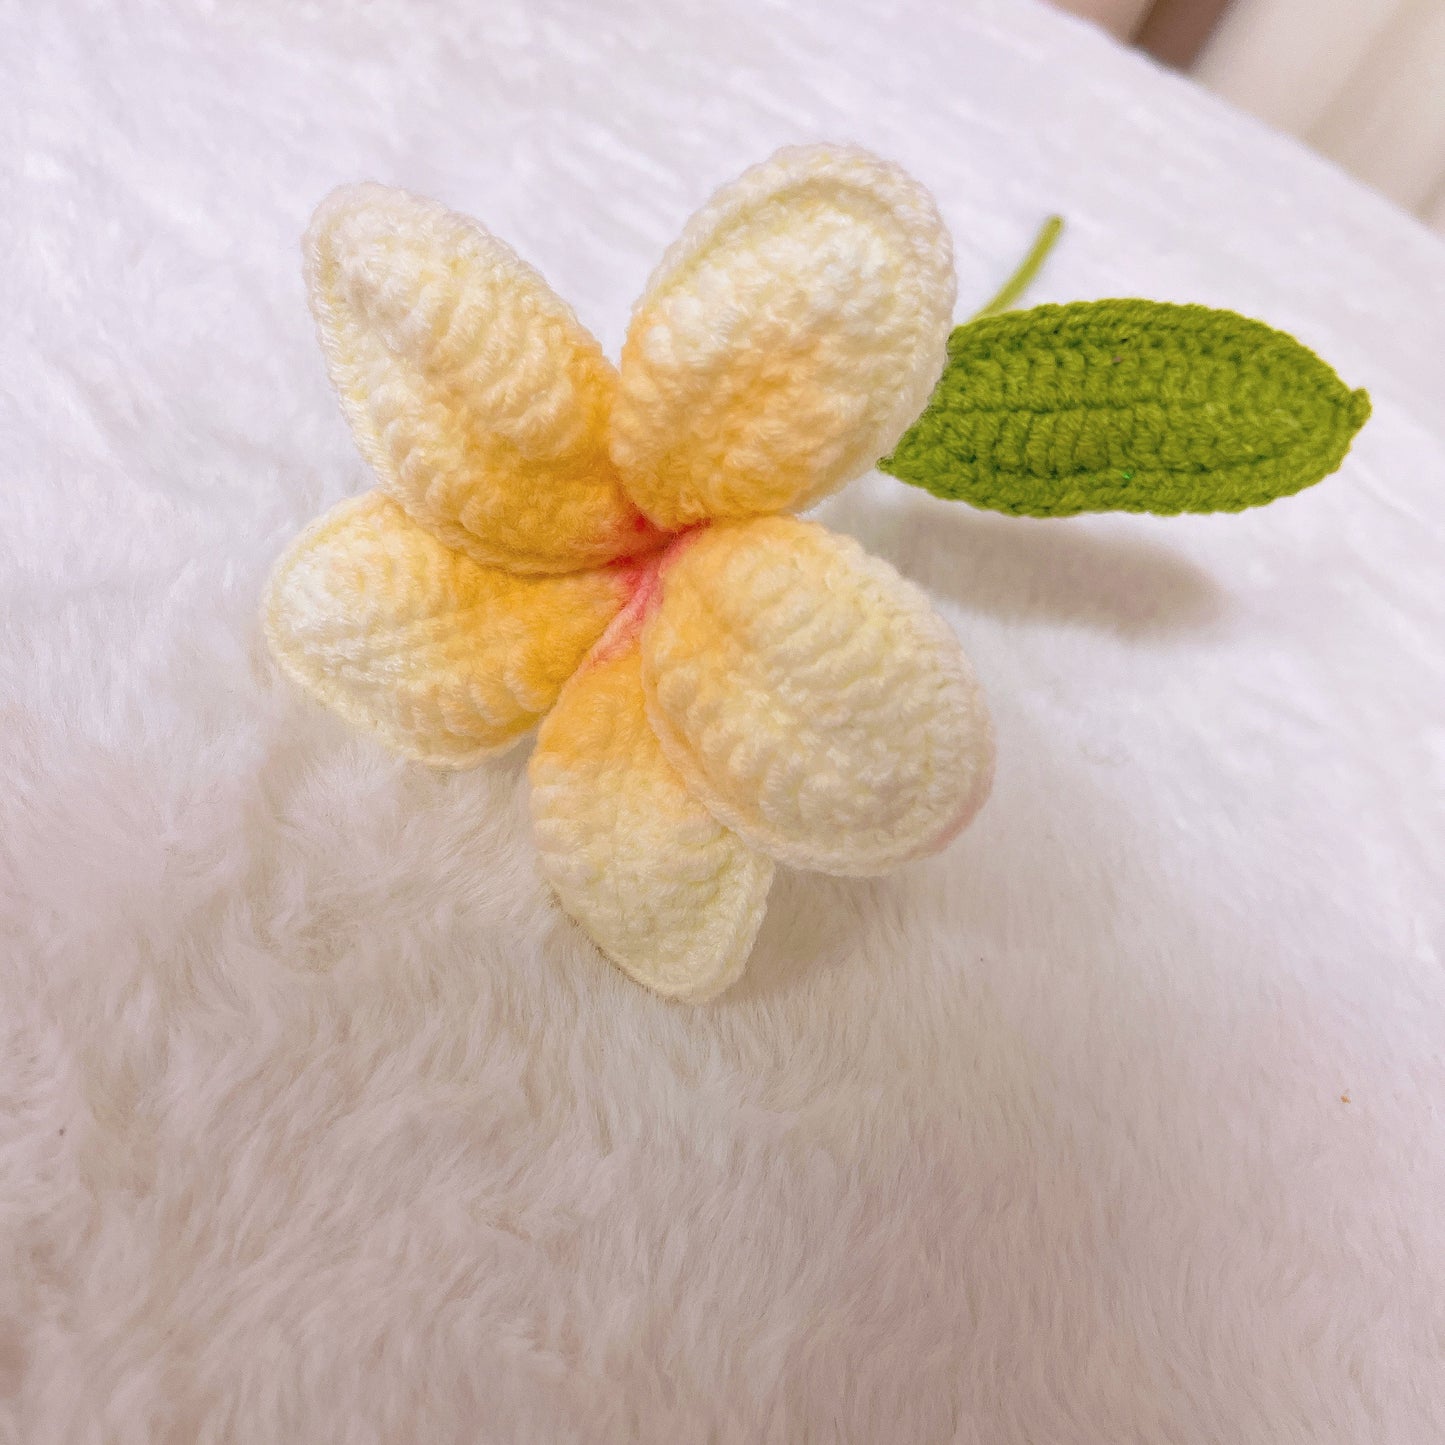 Handcrafted Crochet 12 Frangipani Bouquet with White and Silver Packaging - Yellow Petals with Orange Cores